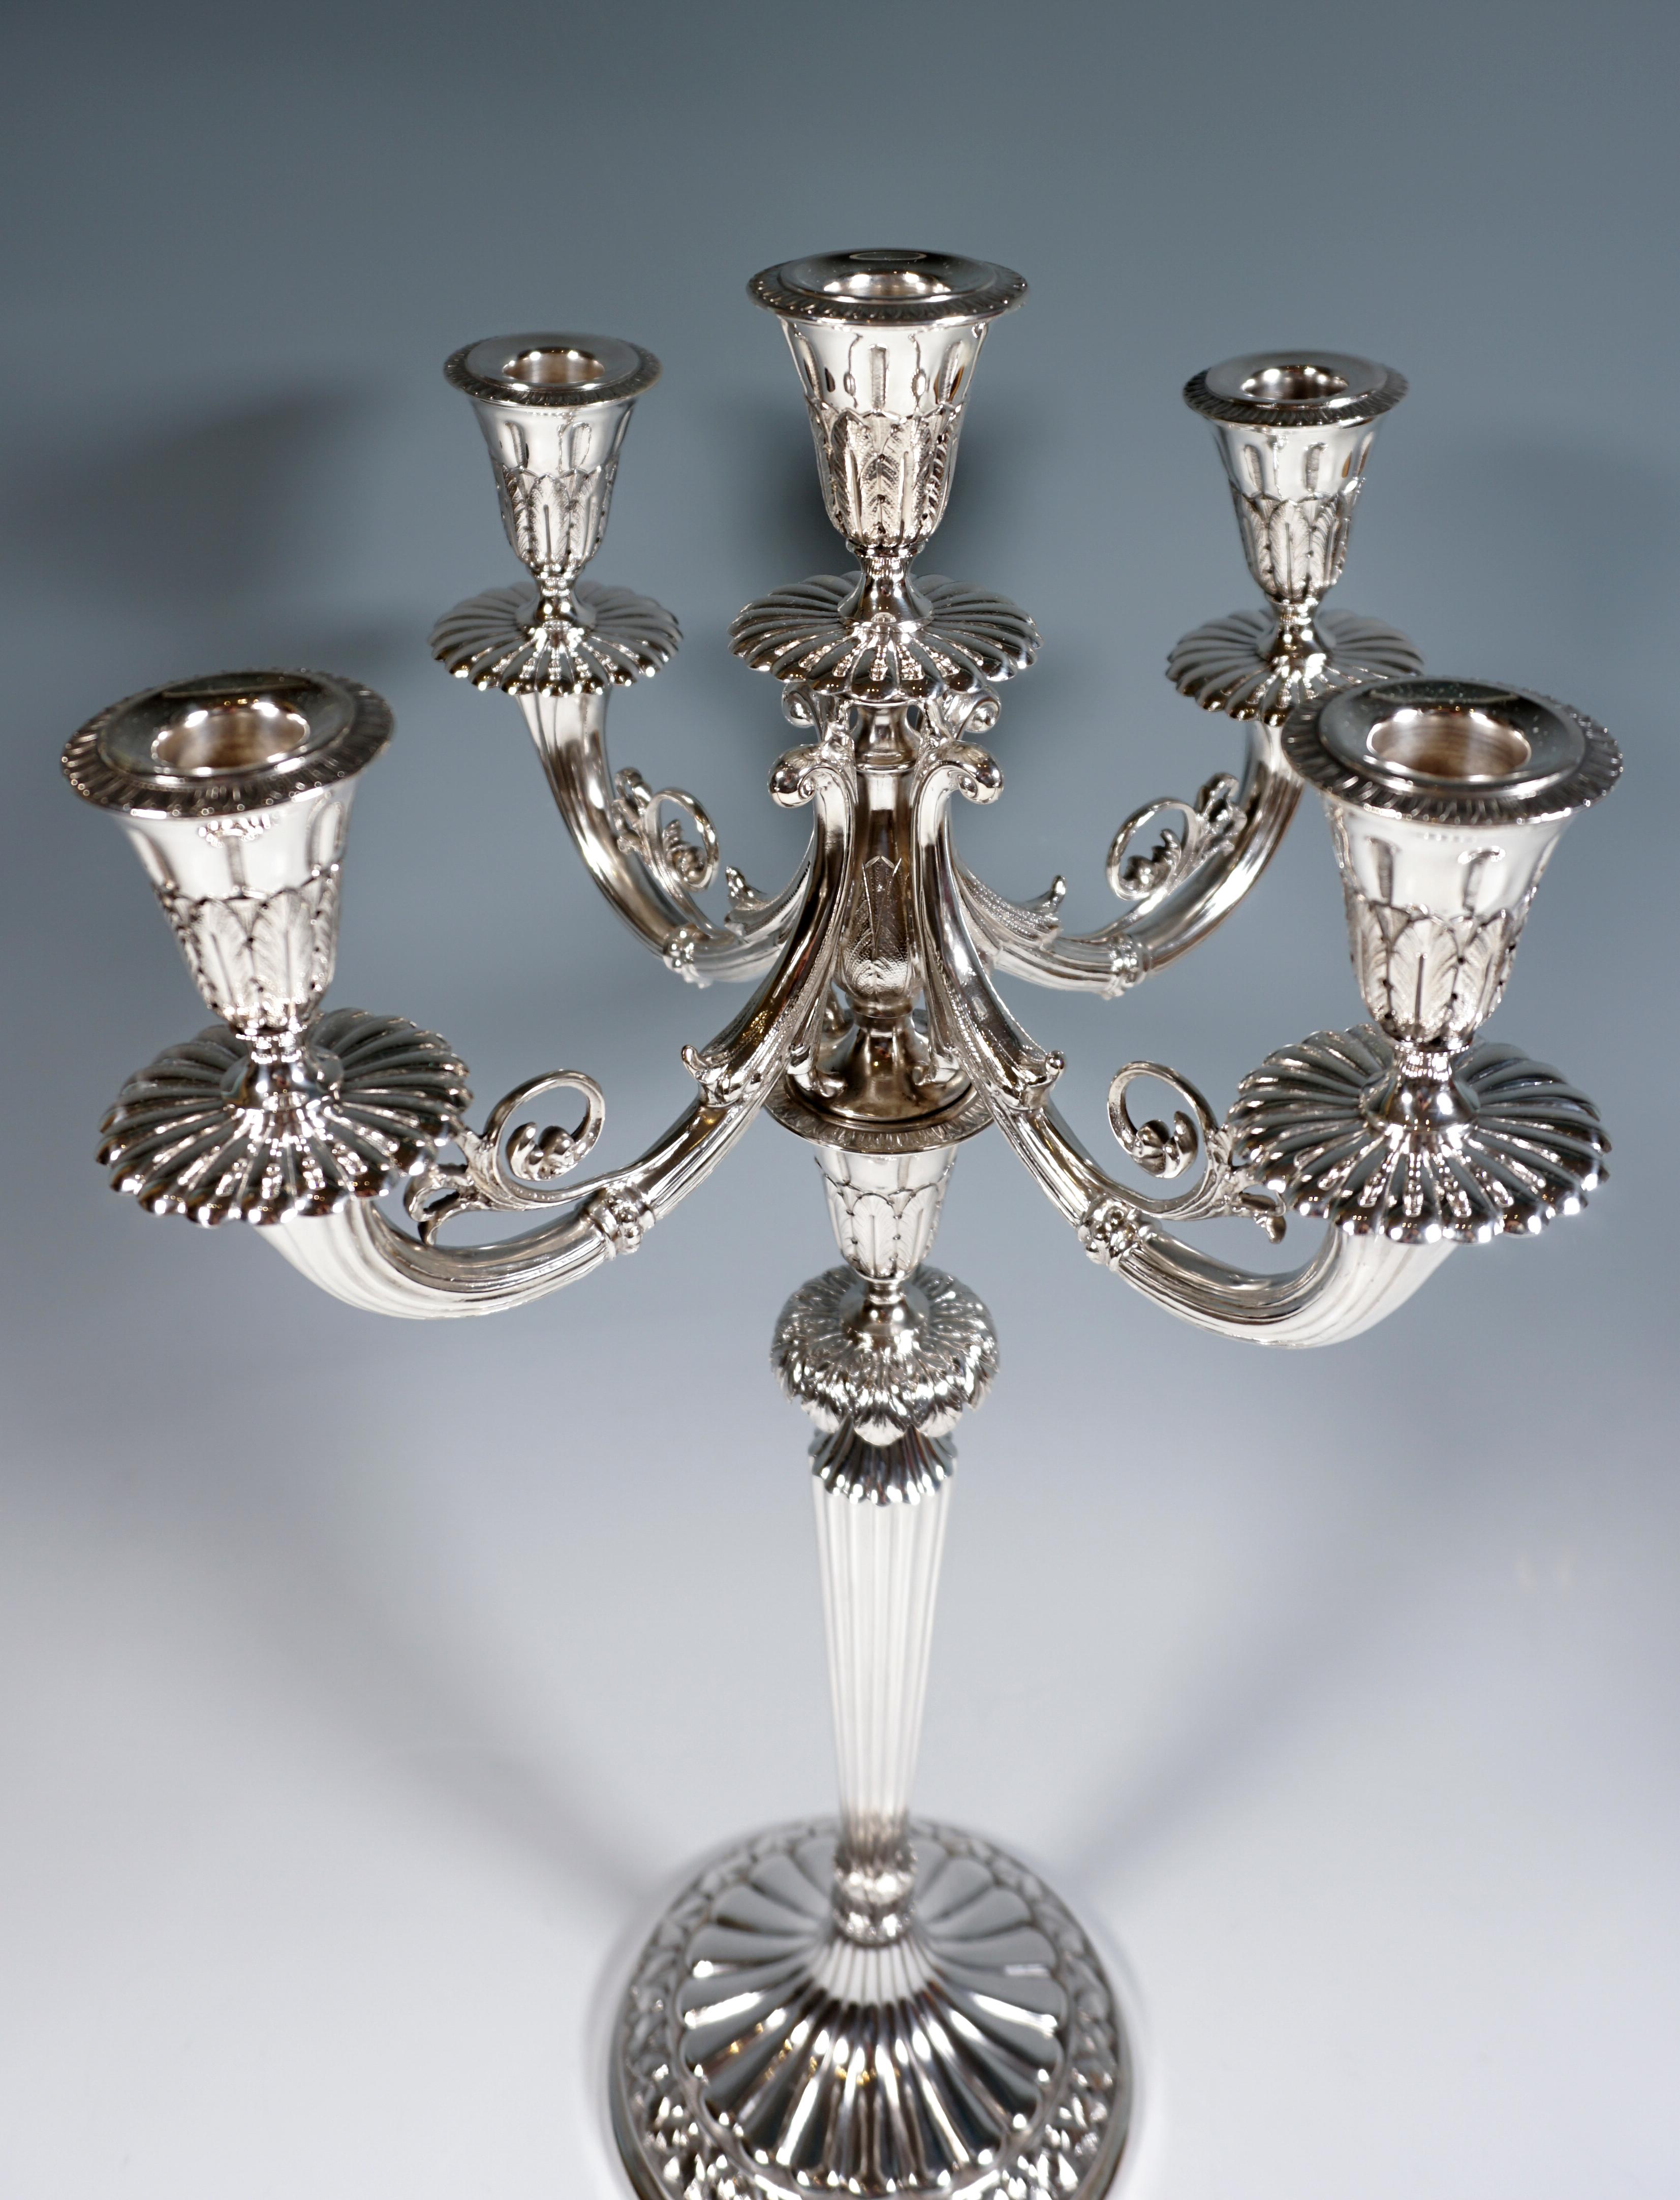 Italian Pair of 5-Flame Silver Candelabras with Acanthus Decoration, Milan, Around 1950